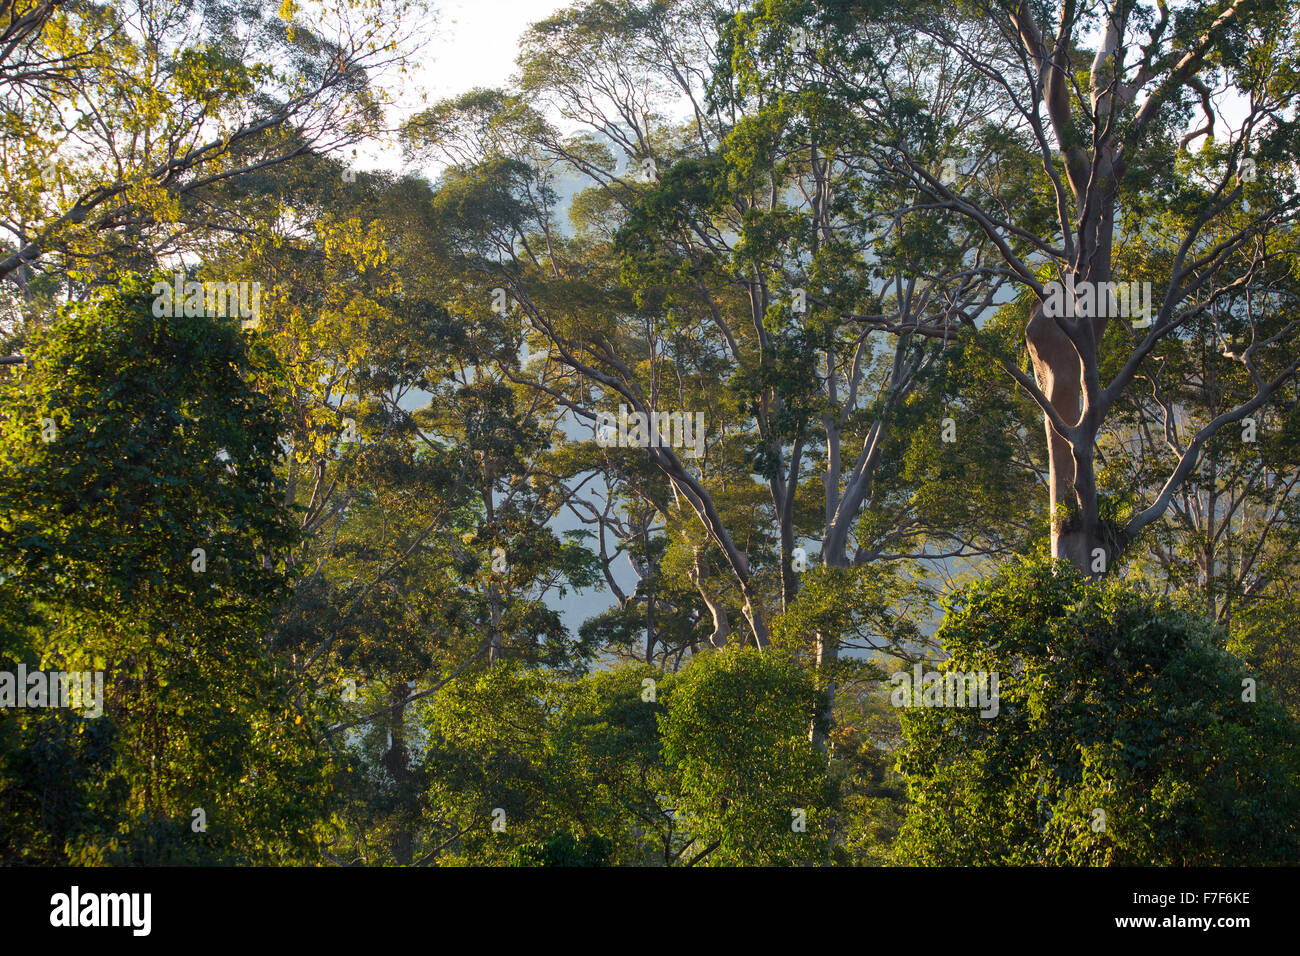 Early morning light in tropical rainforest, Danum Valley, Sabah, Malaysia Stock Photo